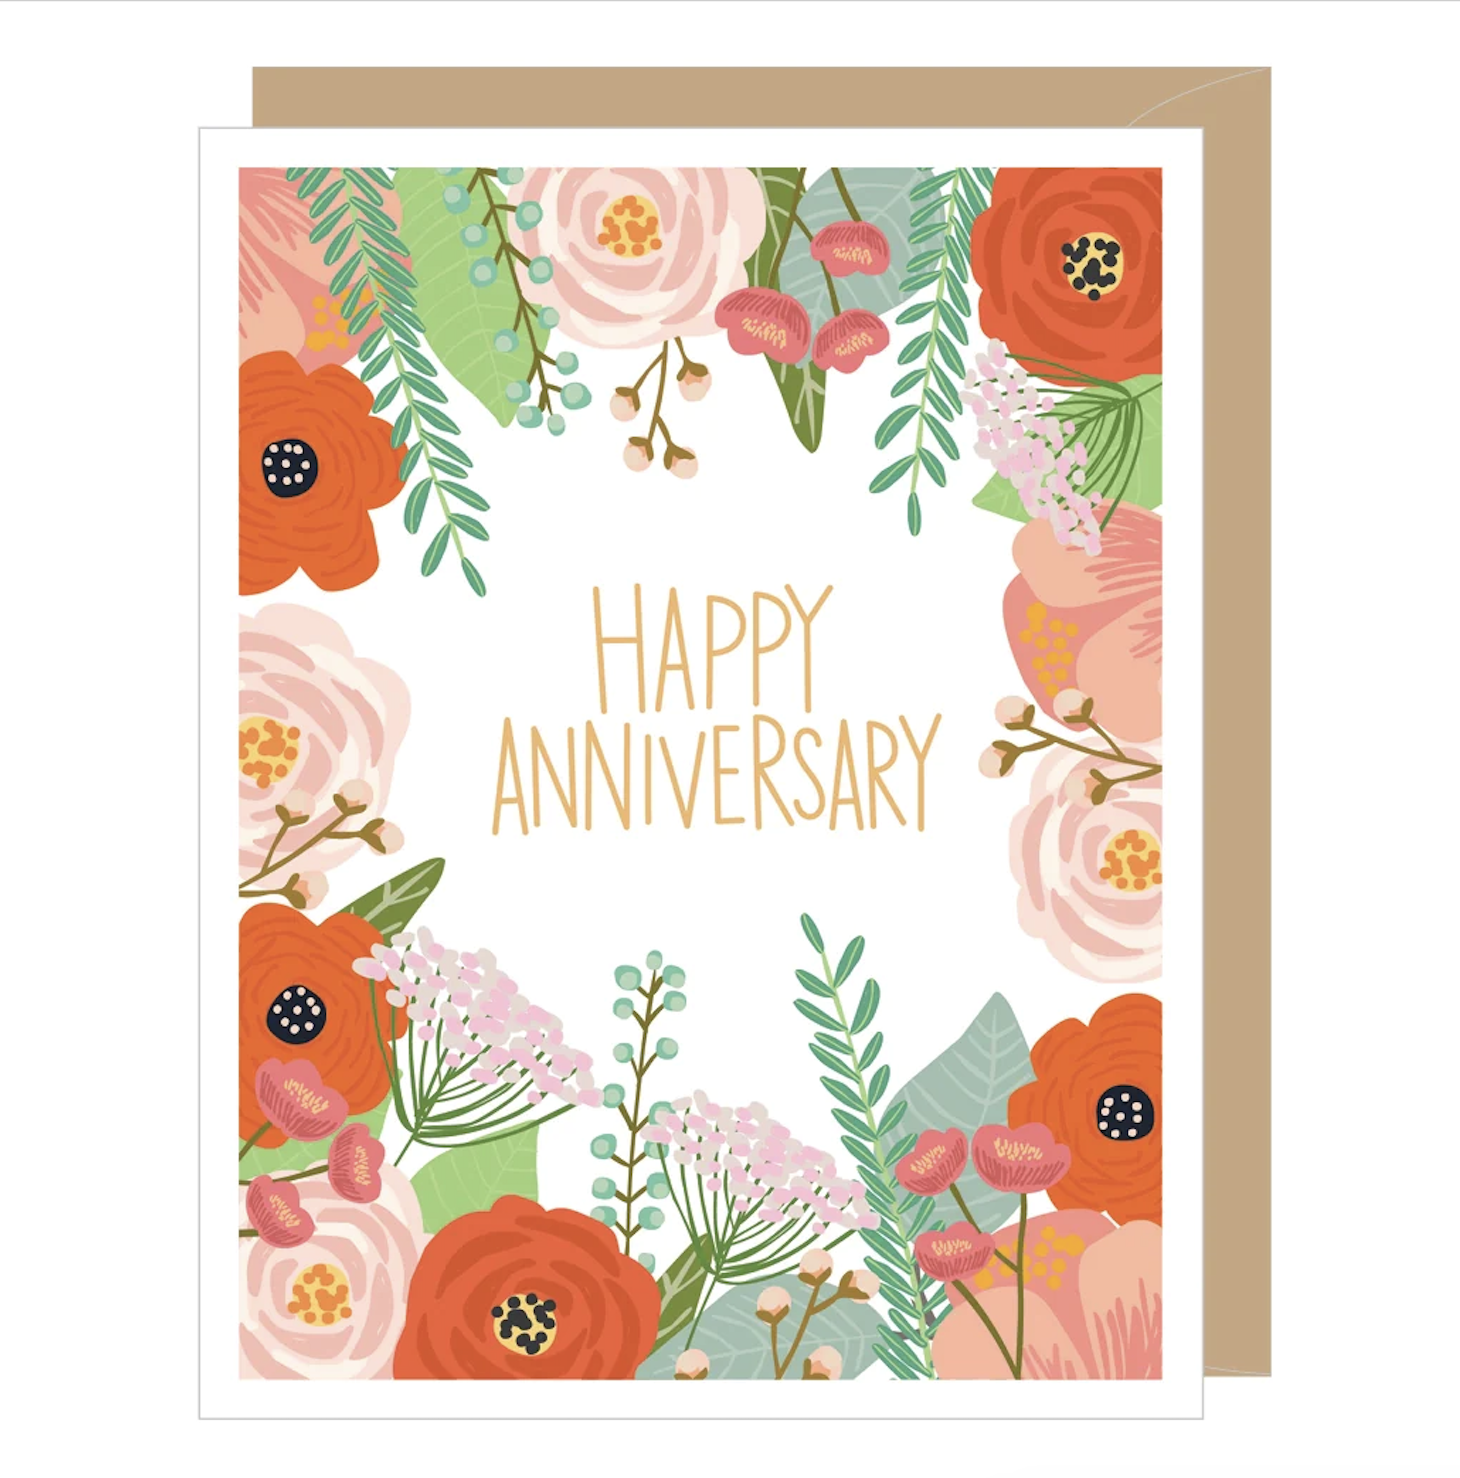  Floral Designs for 25th Anniversary Cards